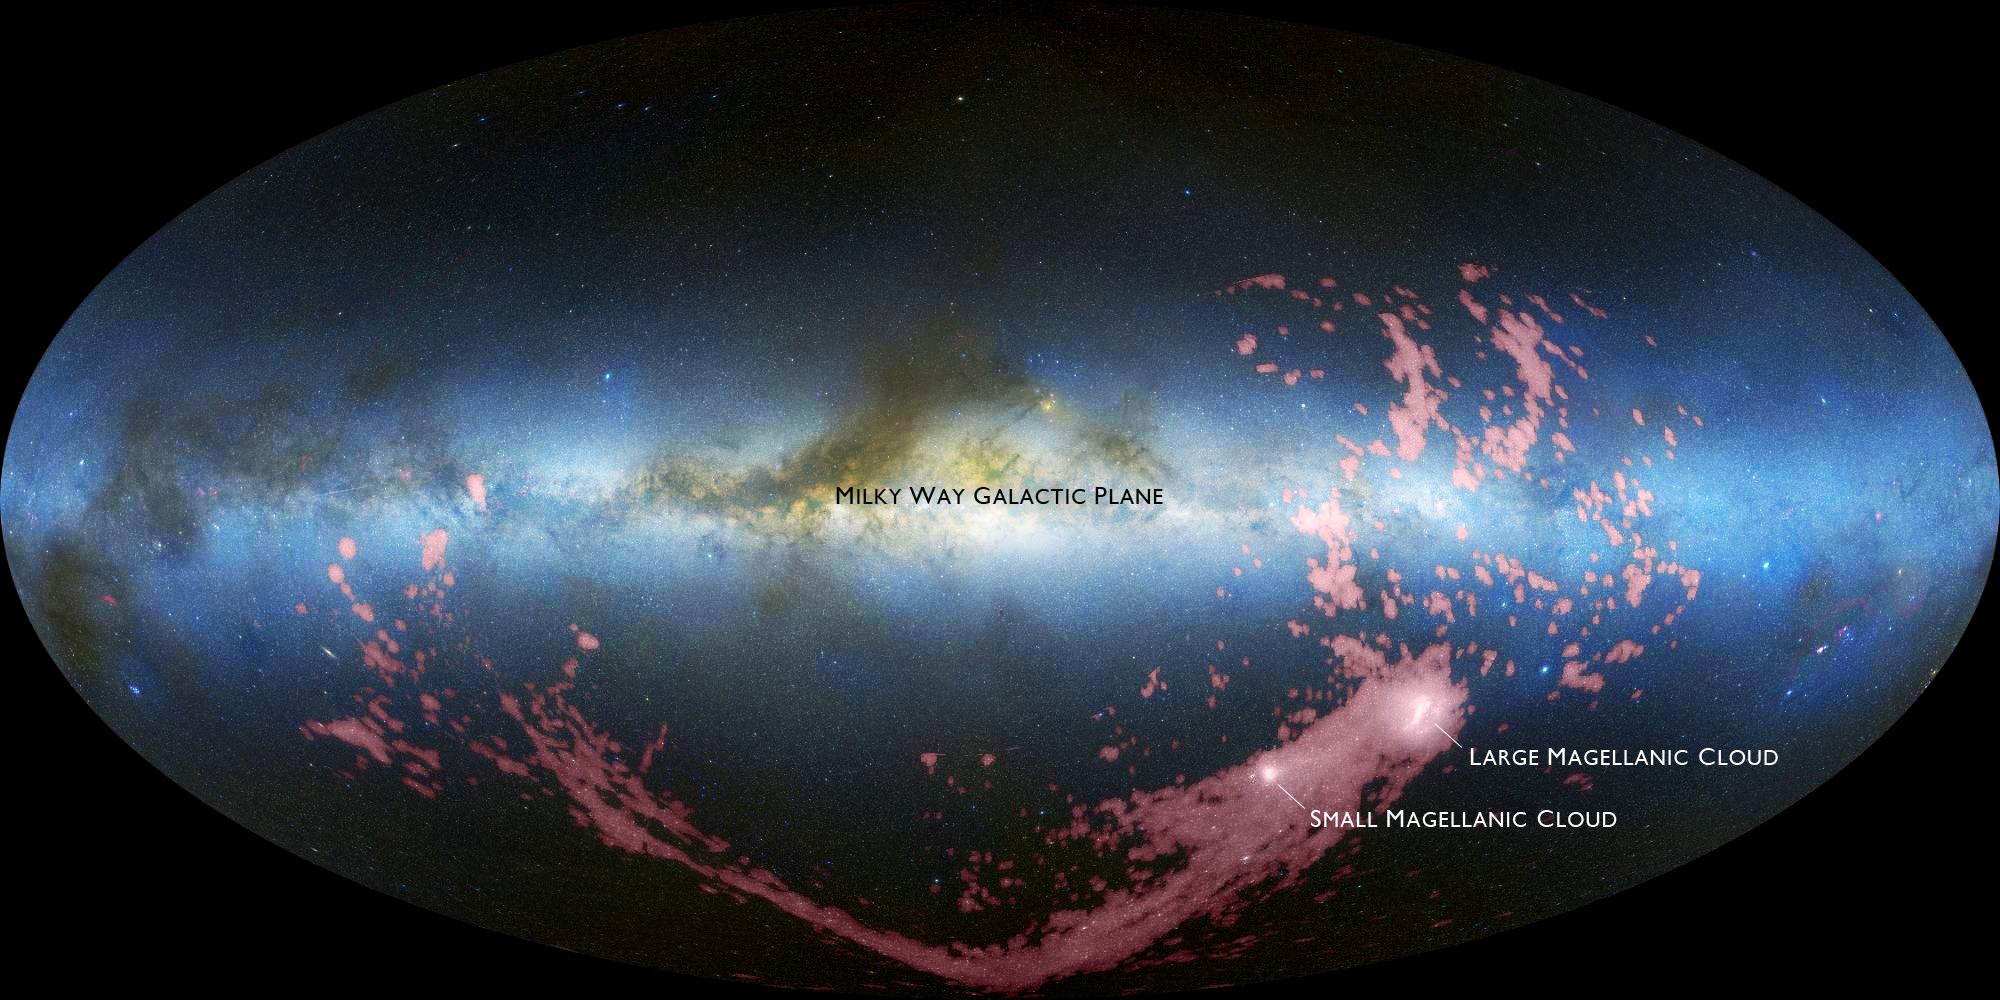 The Magellanic Stream trails behind the Small and Large Magellanic Clouds - visible below the Milky Way's galactic disk to the right. Ahead of the Clouds is another structure called the Leading Arm. This is a false colour image - the Stream, Arm and Magellanic Bridge between the two Clouds are only visible in radio light. Image Credit: NRAO